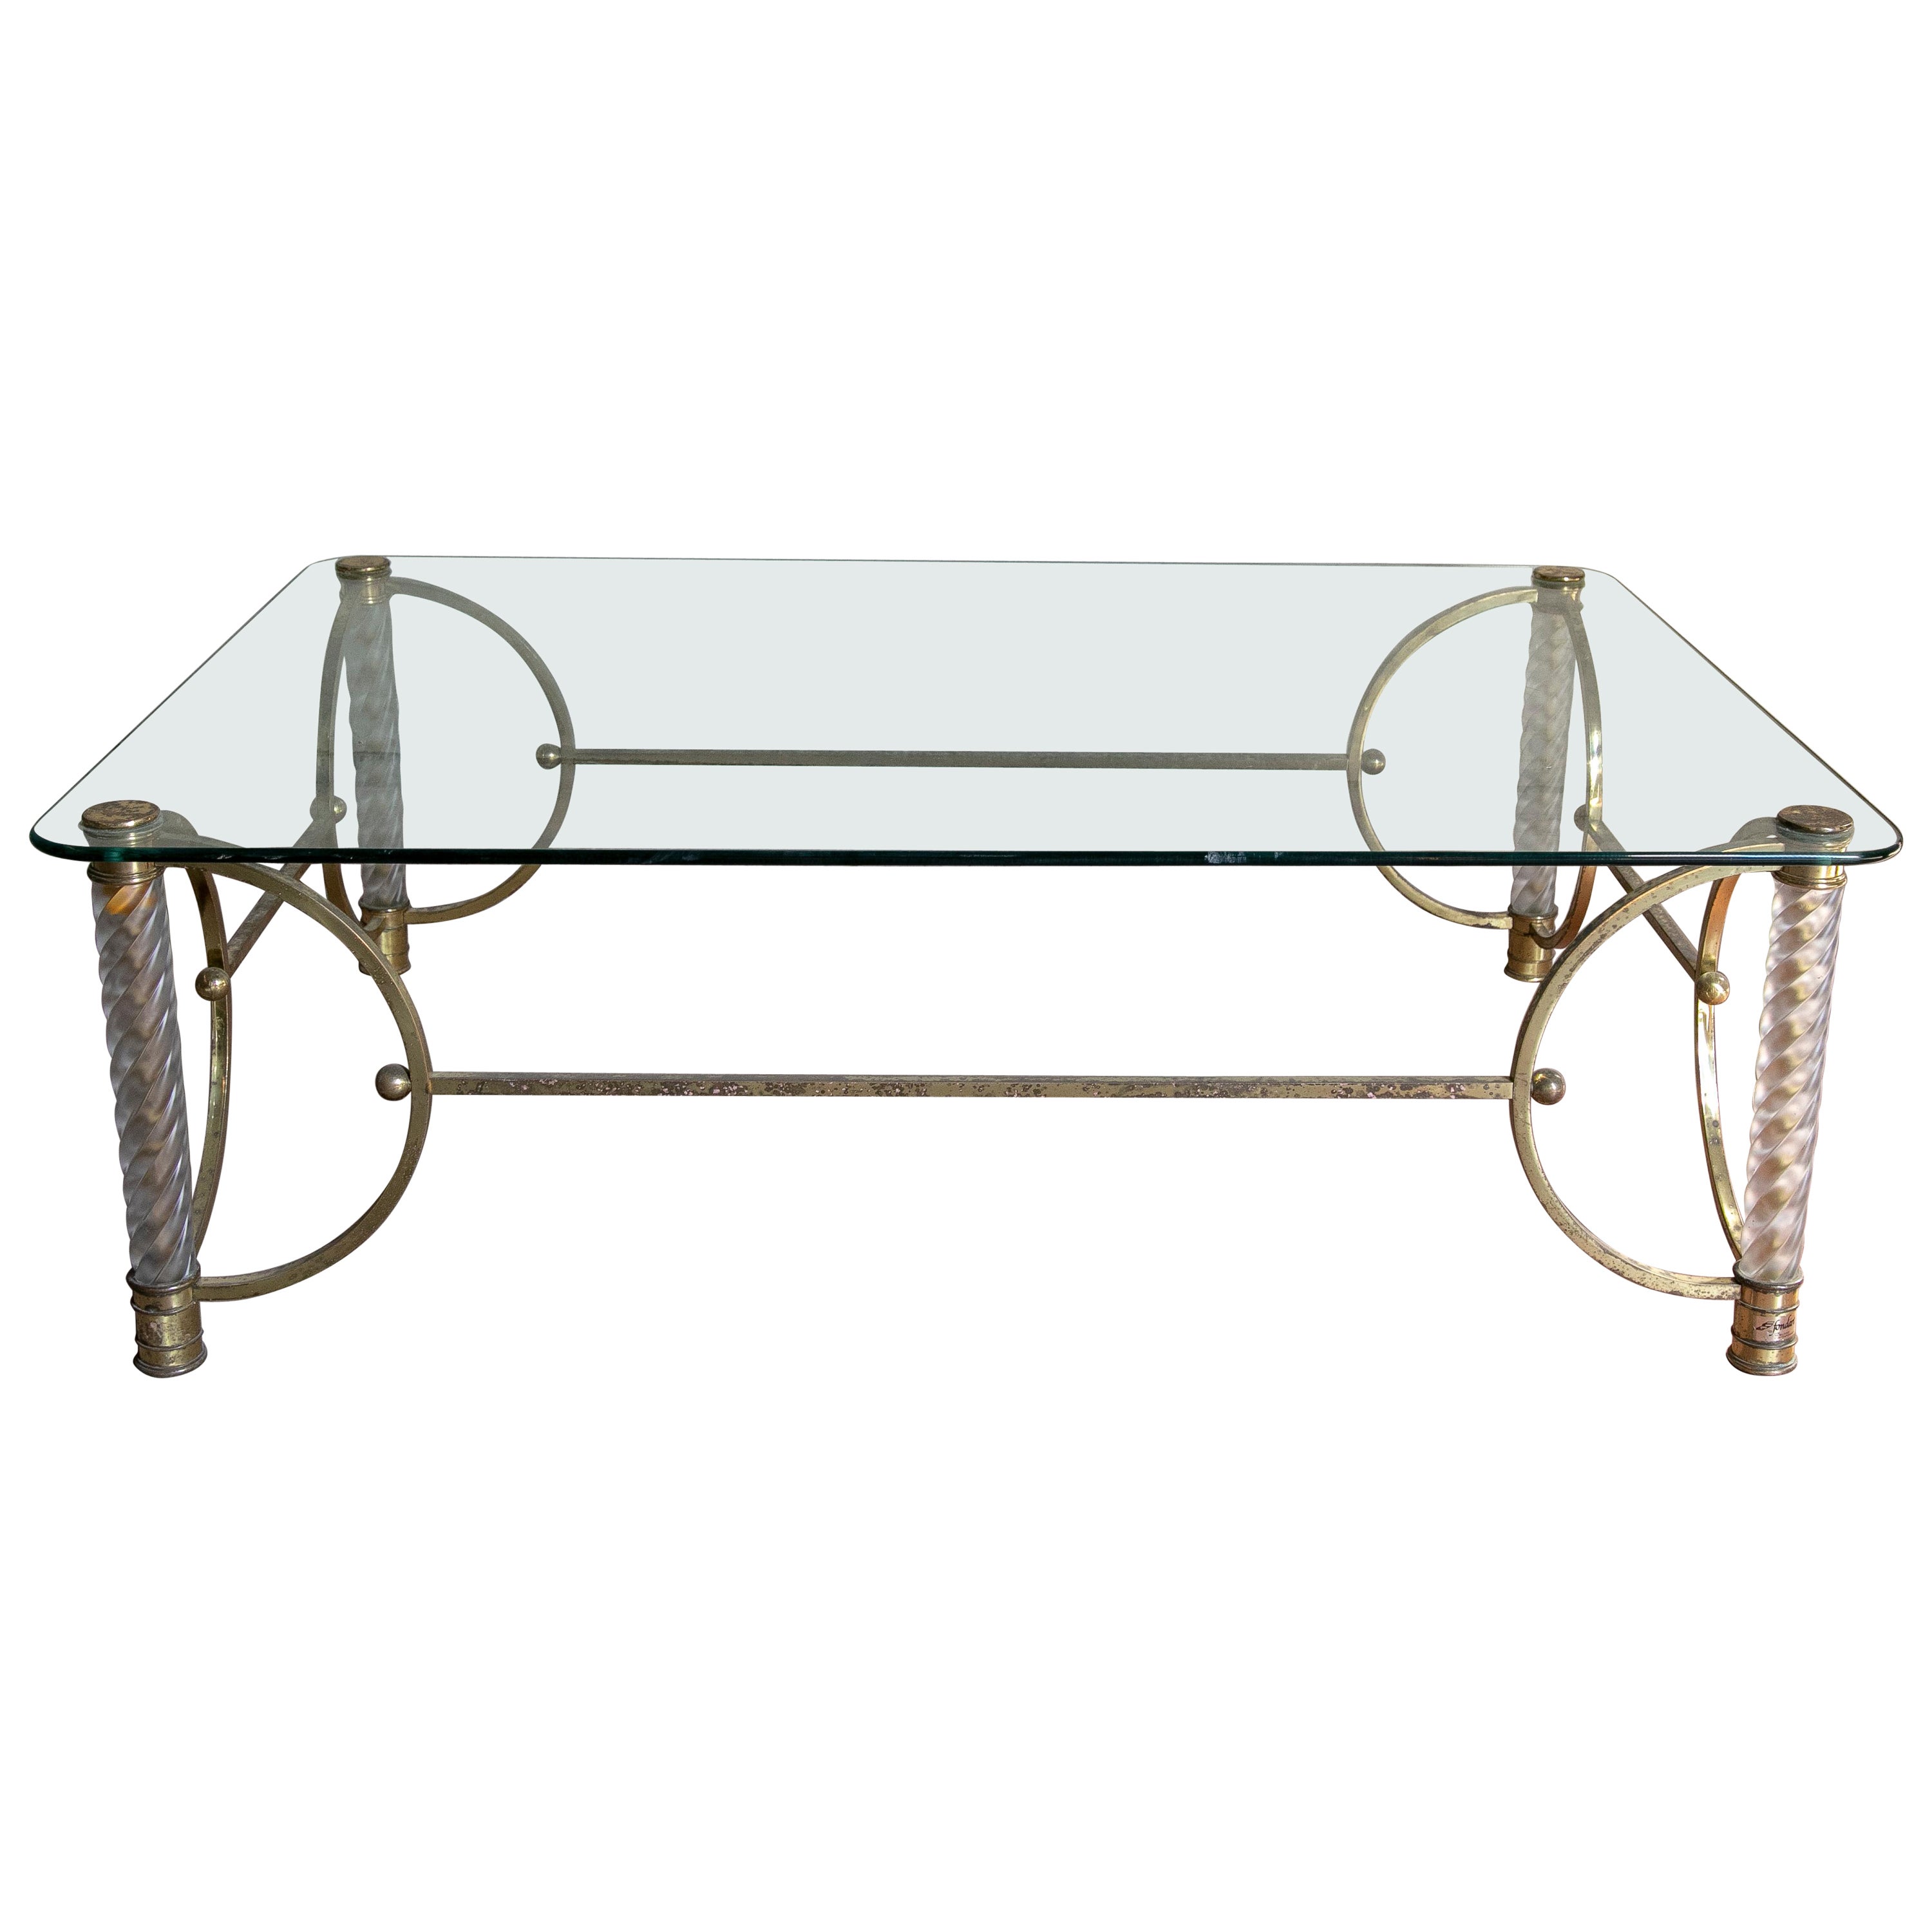 1970s Gilded Metal Table with Legs and Glass Table Top For Sale